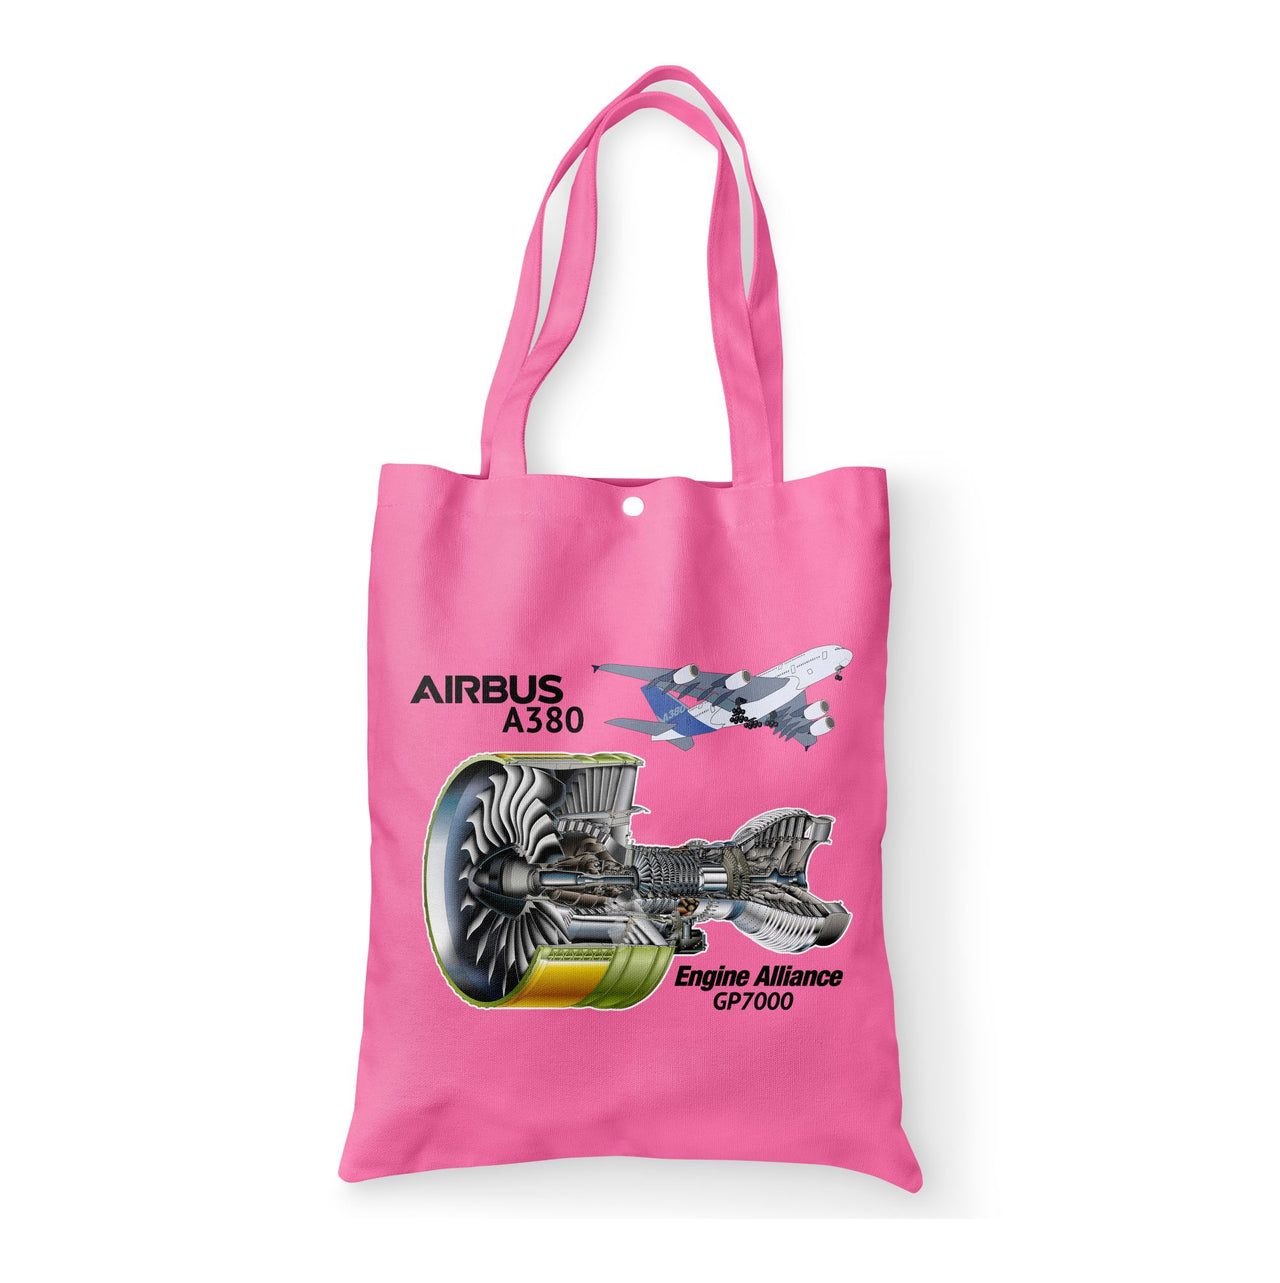 Airbus A380 & GP7000 Engine Designed Tote Bags